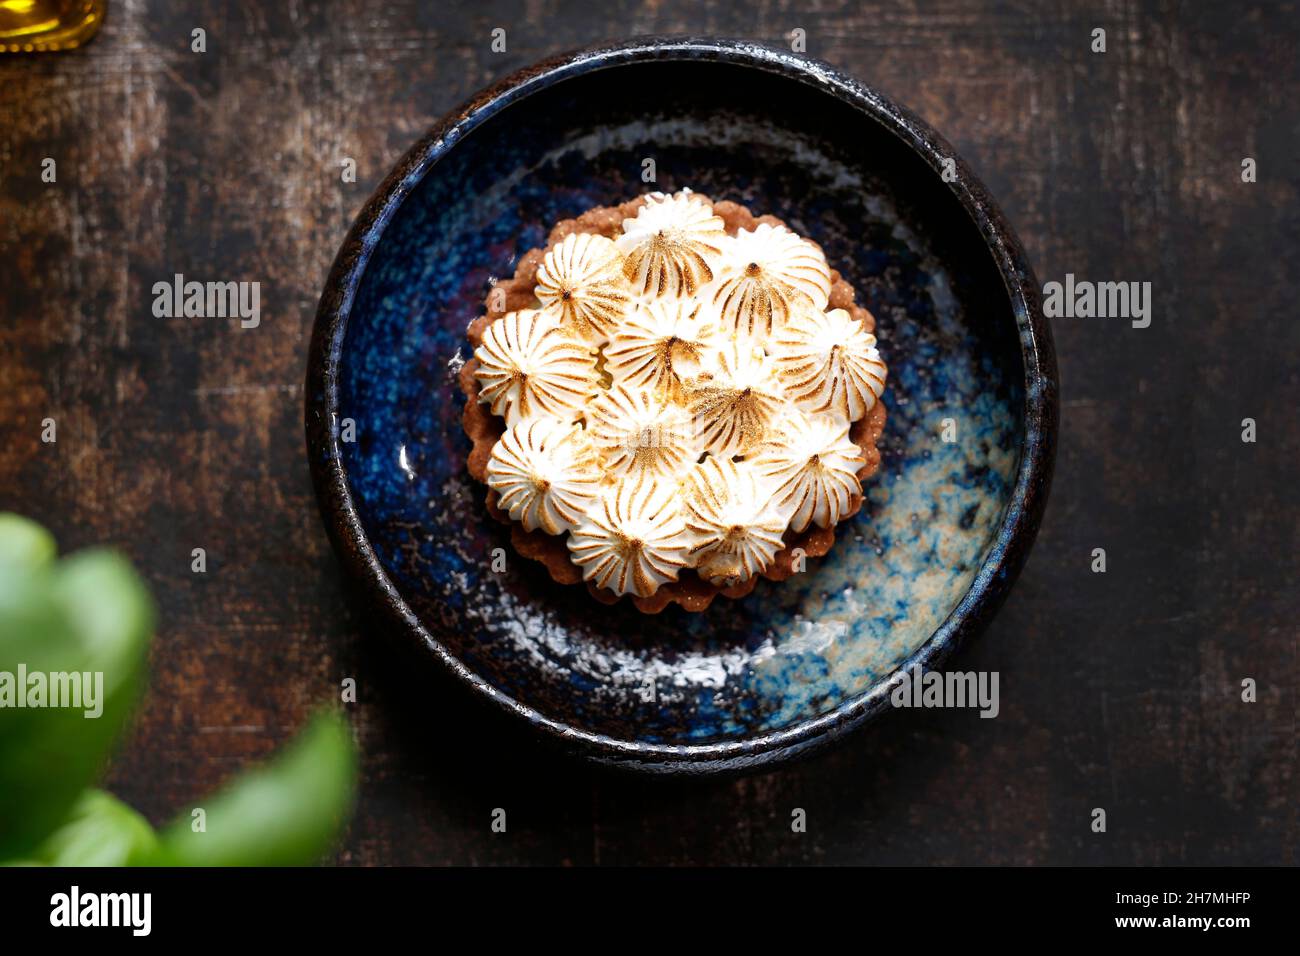 Shortcrust pastry with apples, meringue and nuts. Sweet dessert. A tasty dish.Culinary photography. Suggestion to serve the dish. Stock Photo